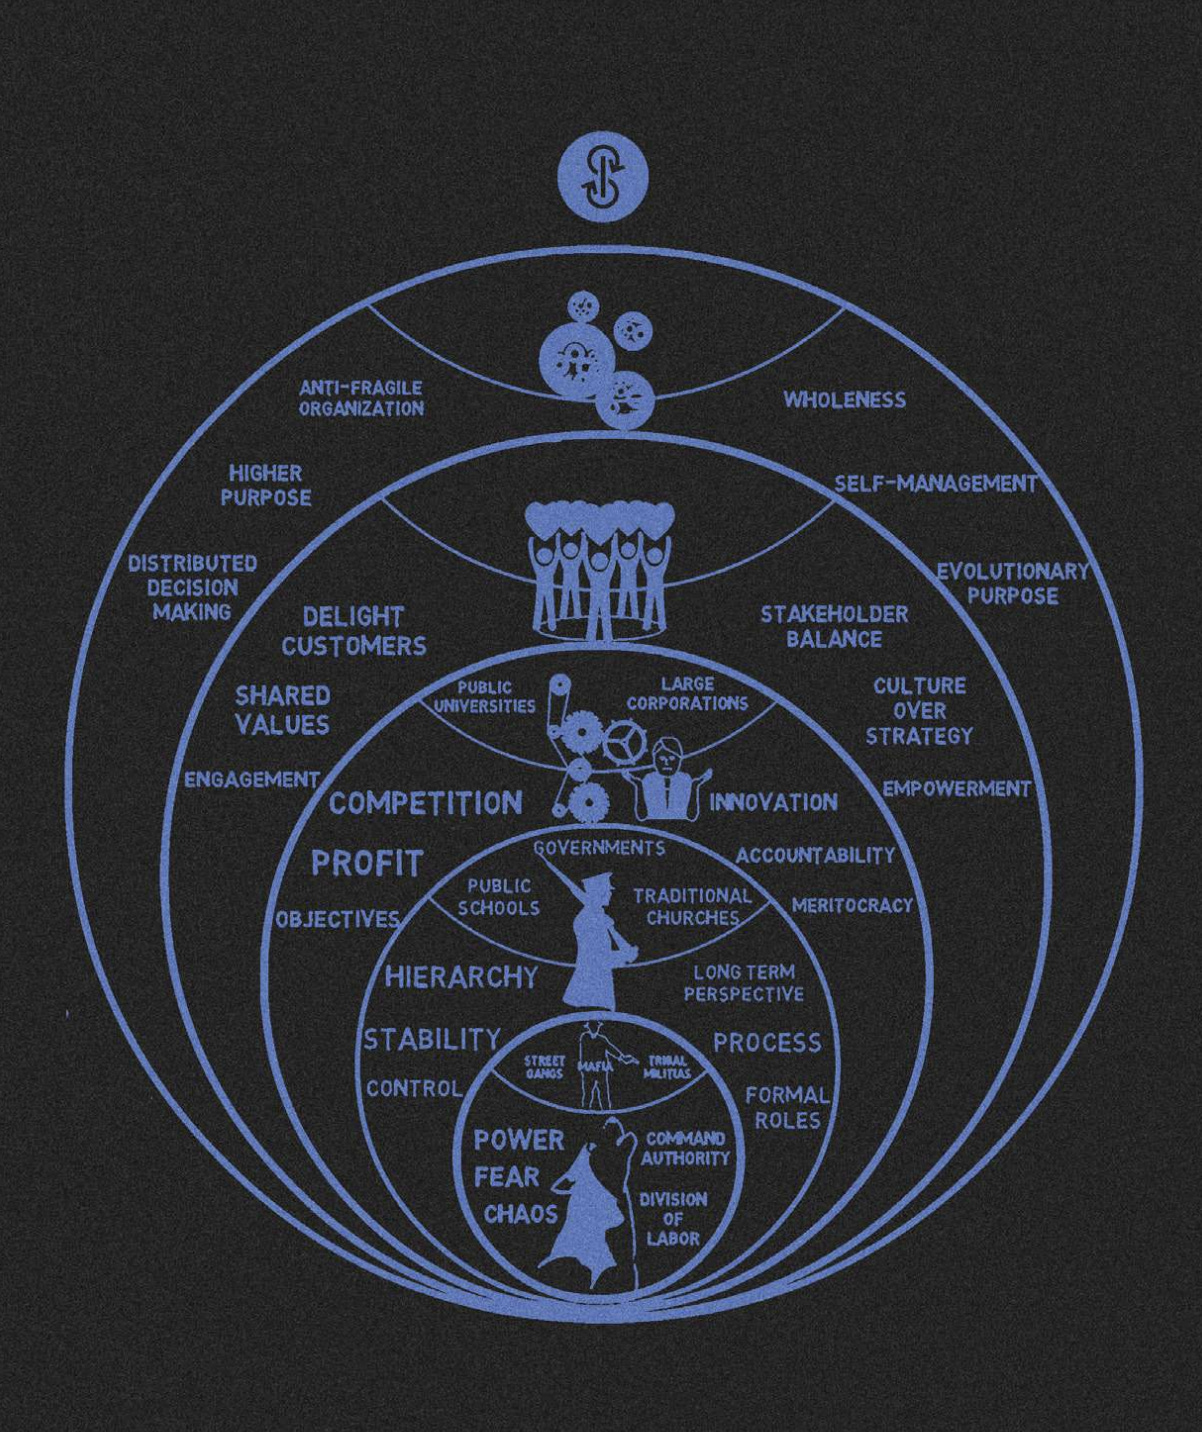 An image from The Blue Pill Book that shows how human society has changed and evolved. This is represented via concentric circles that radiate outwards. At the bottom is “power, fear, chaos,” which then moves to “hierarchy, stability, control,” then “competition, profit, objectives,” then “delight customers, shared values, engagement,” and lastly“distributed decision making, higher purpose, anti-fragile organization.”